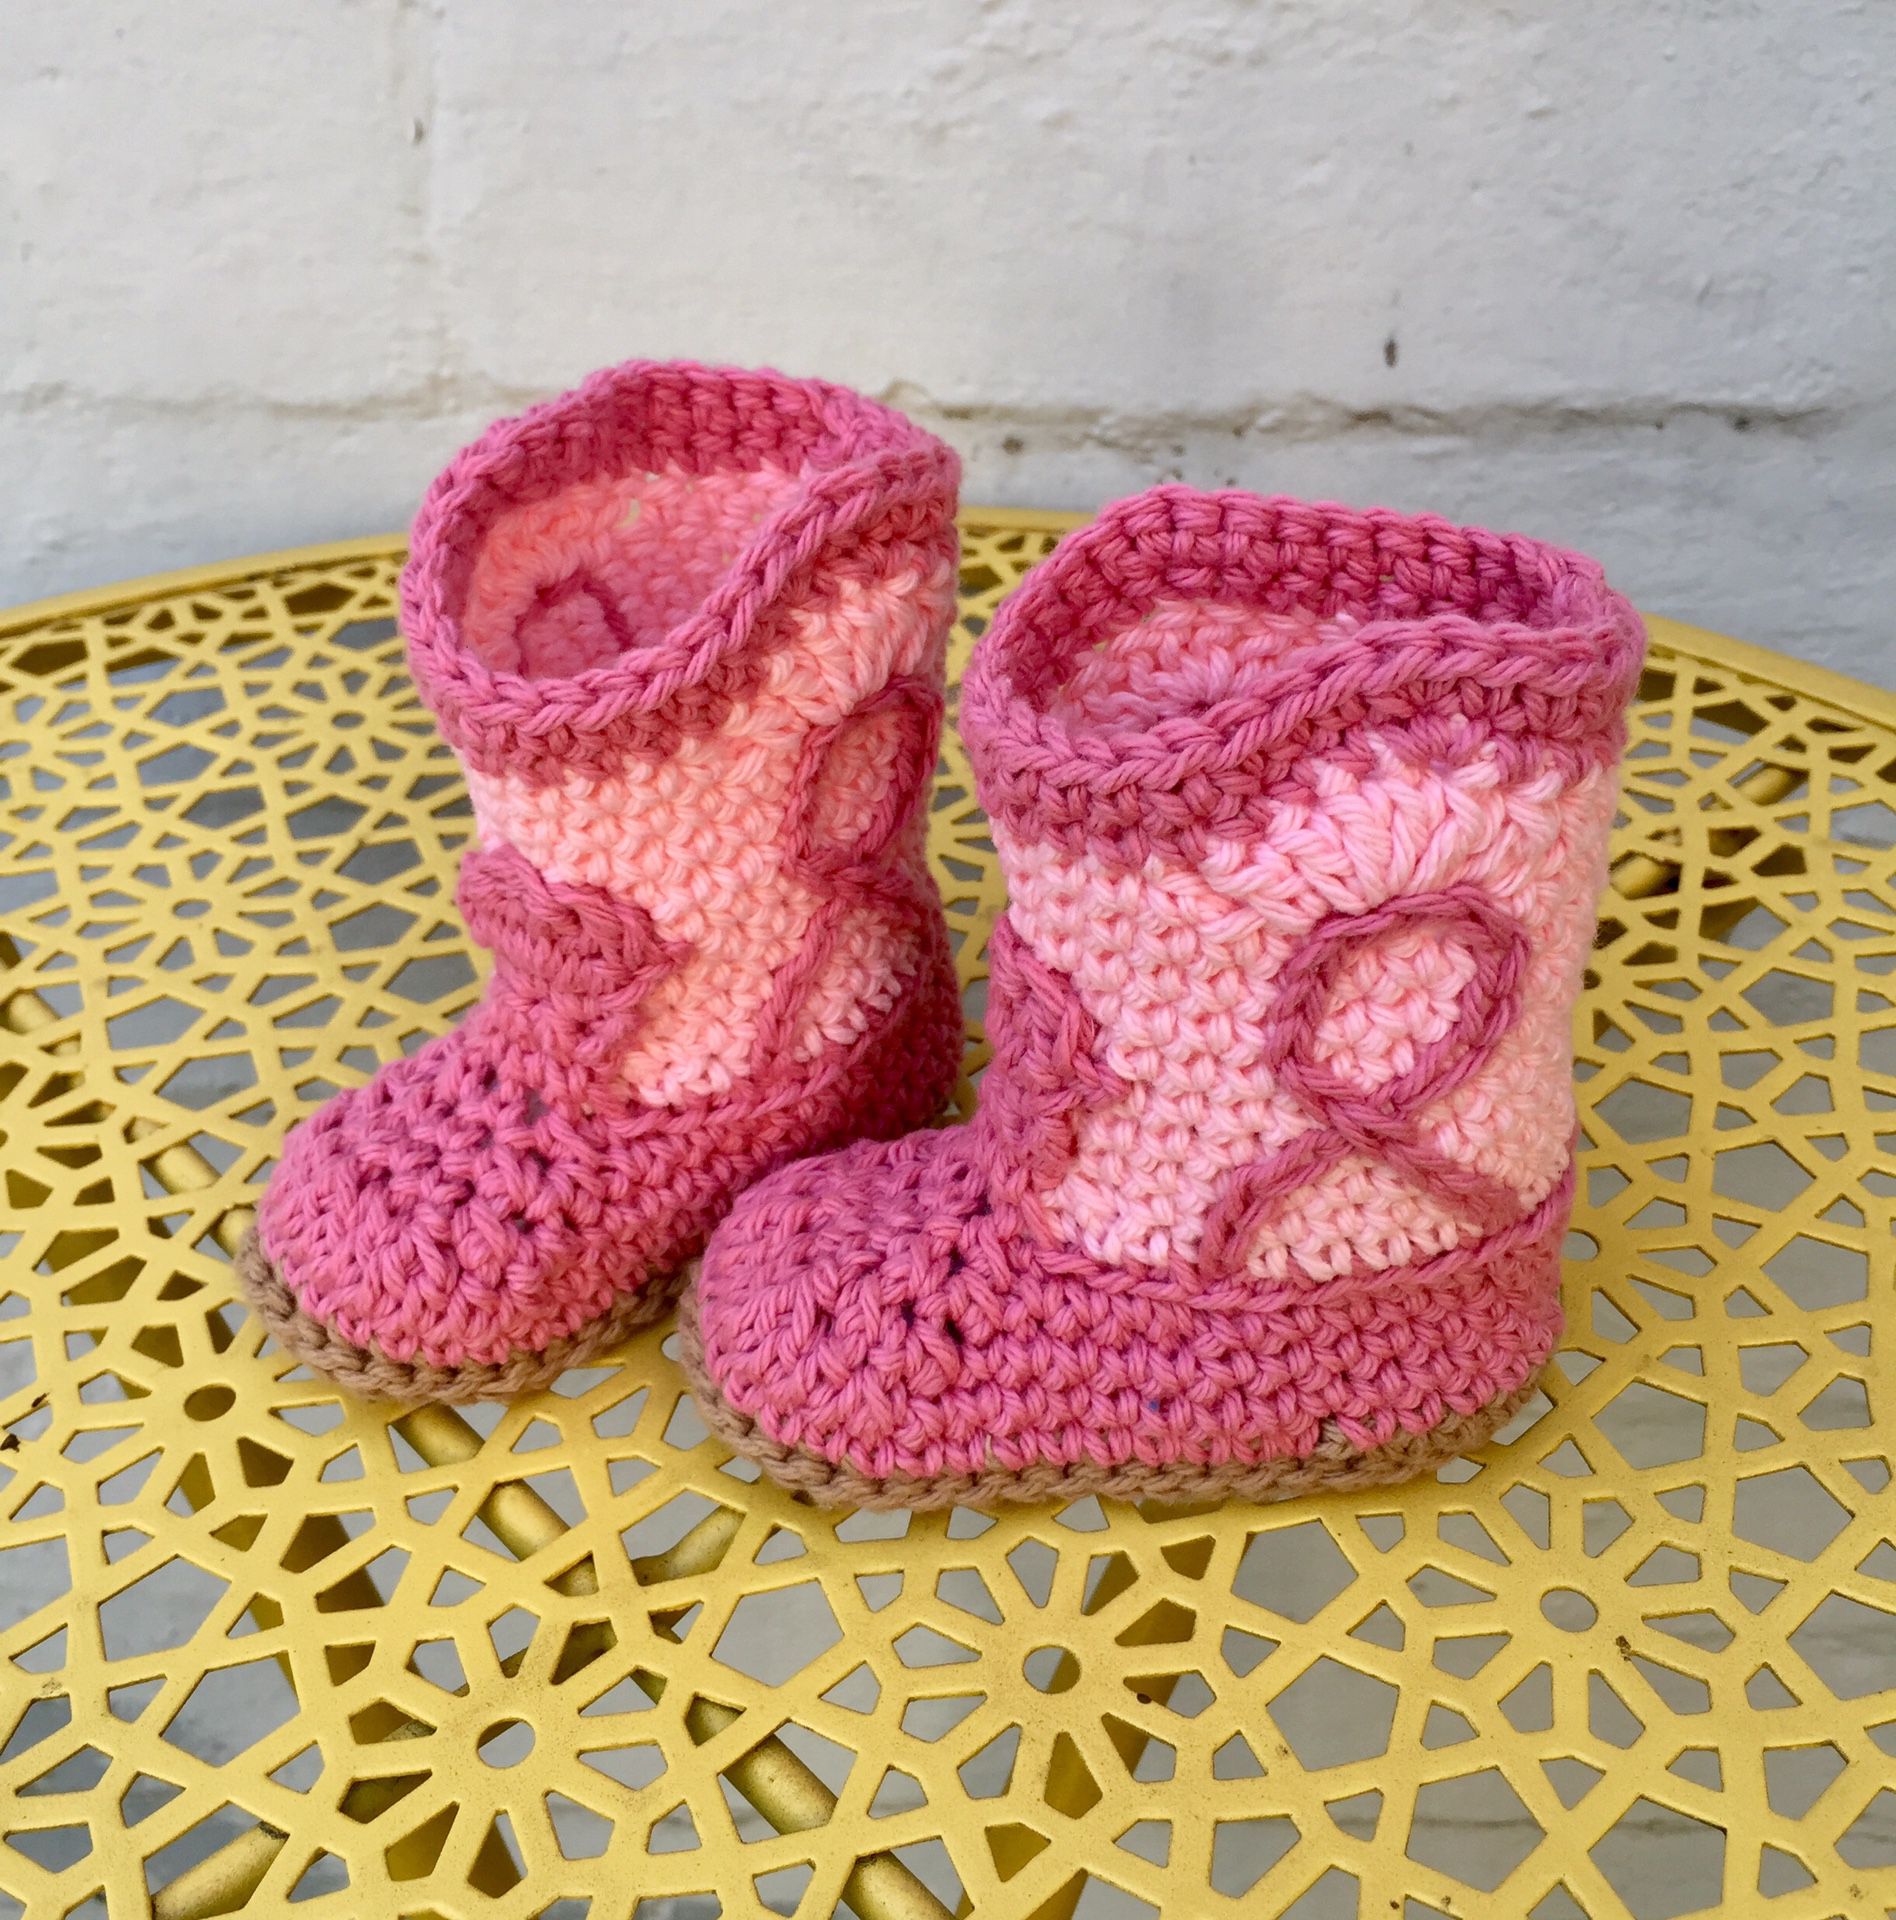 Pink Crochet Cowboy Boot Baby Booties - Medium | 12 Months - New with Box